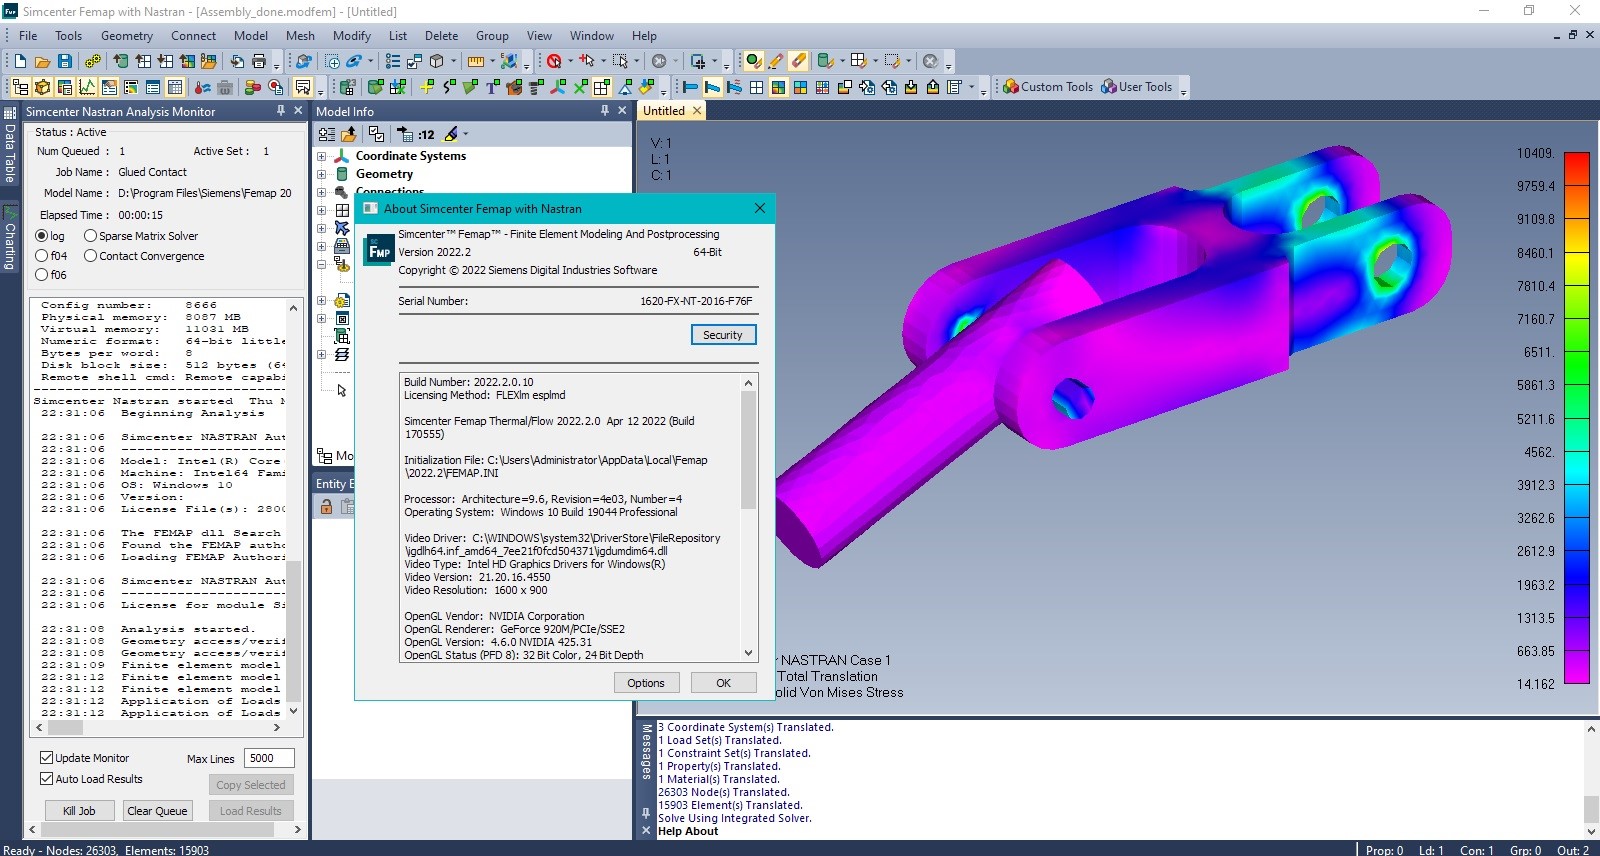 Working with Siemens Simcenter FEMAP 2022.2.0 with NX Nastran full